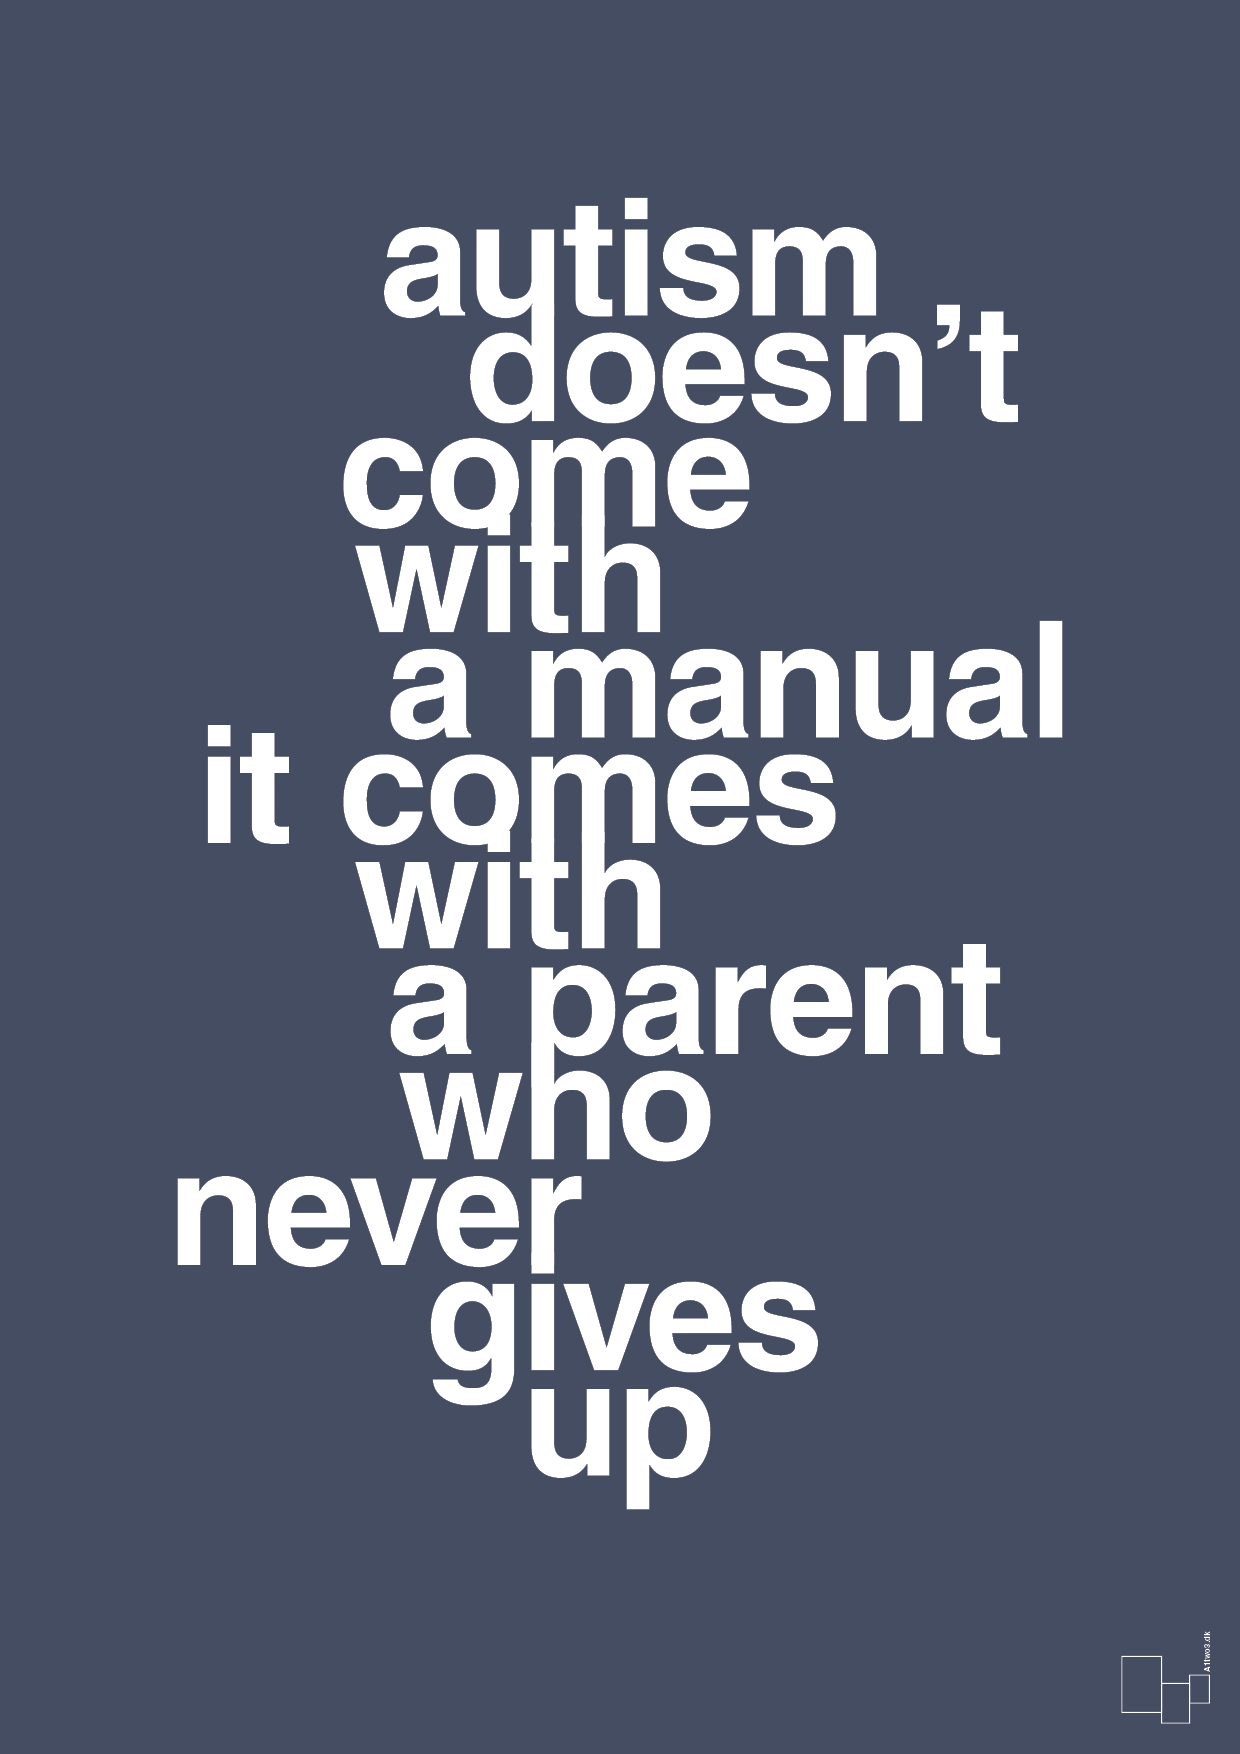 autism doesnt come with a manual it comes with a parent who never gives up - Plakat med Samfund i Petrol